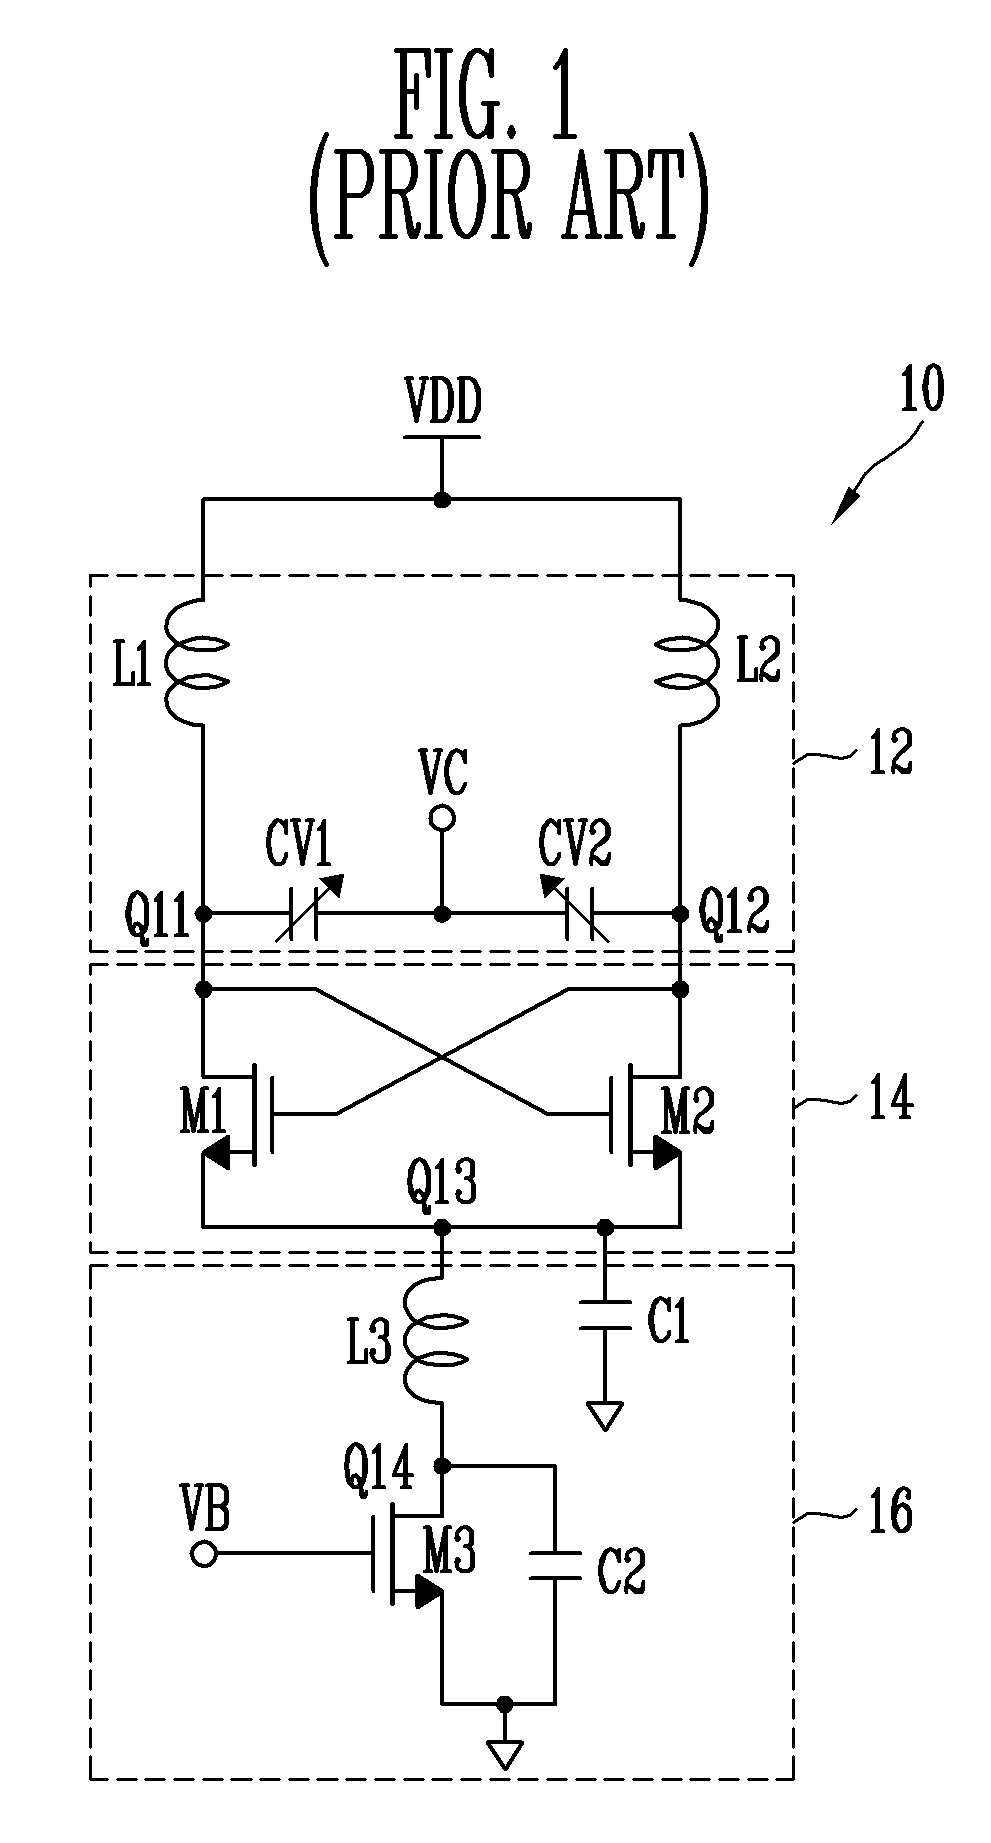 Voltage controlled oscillator with switching bias